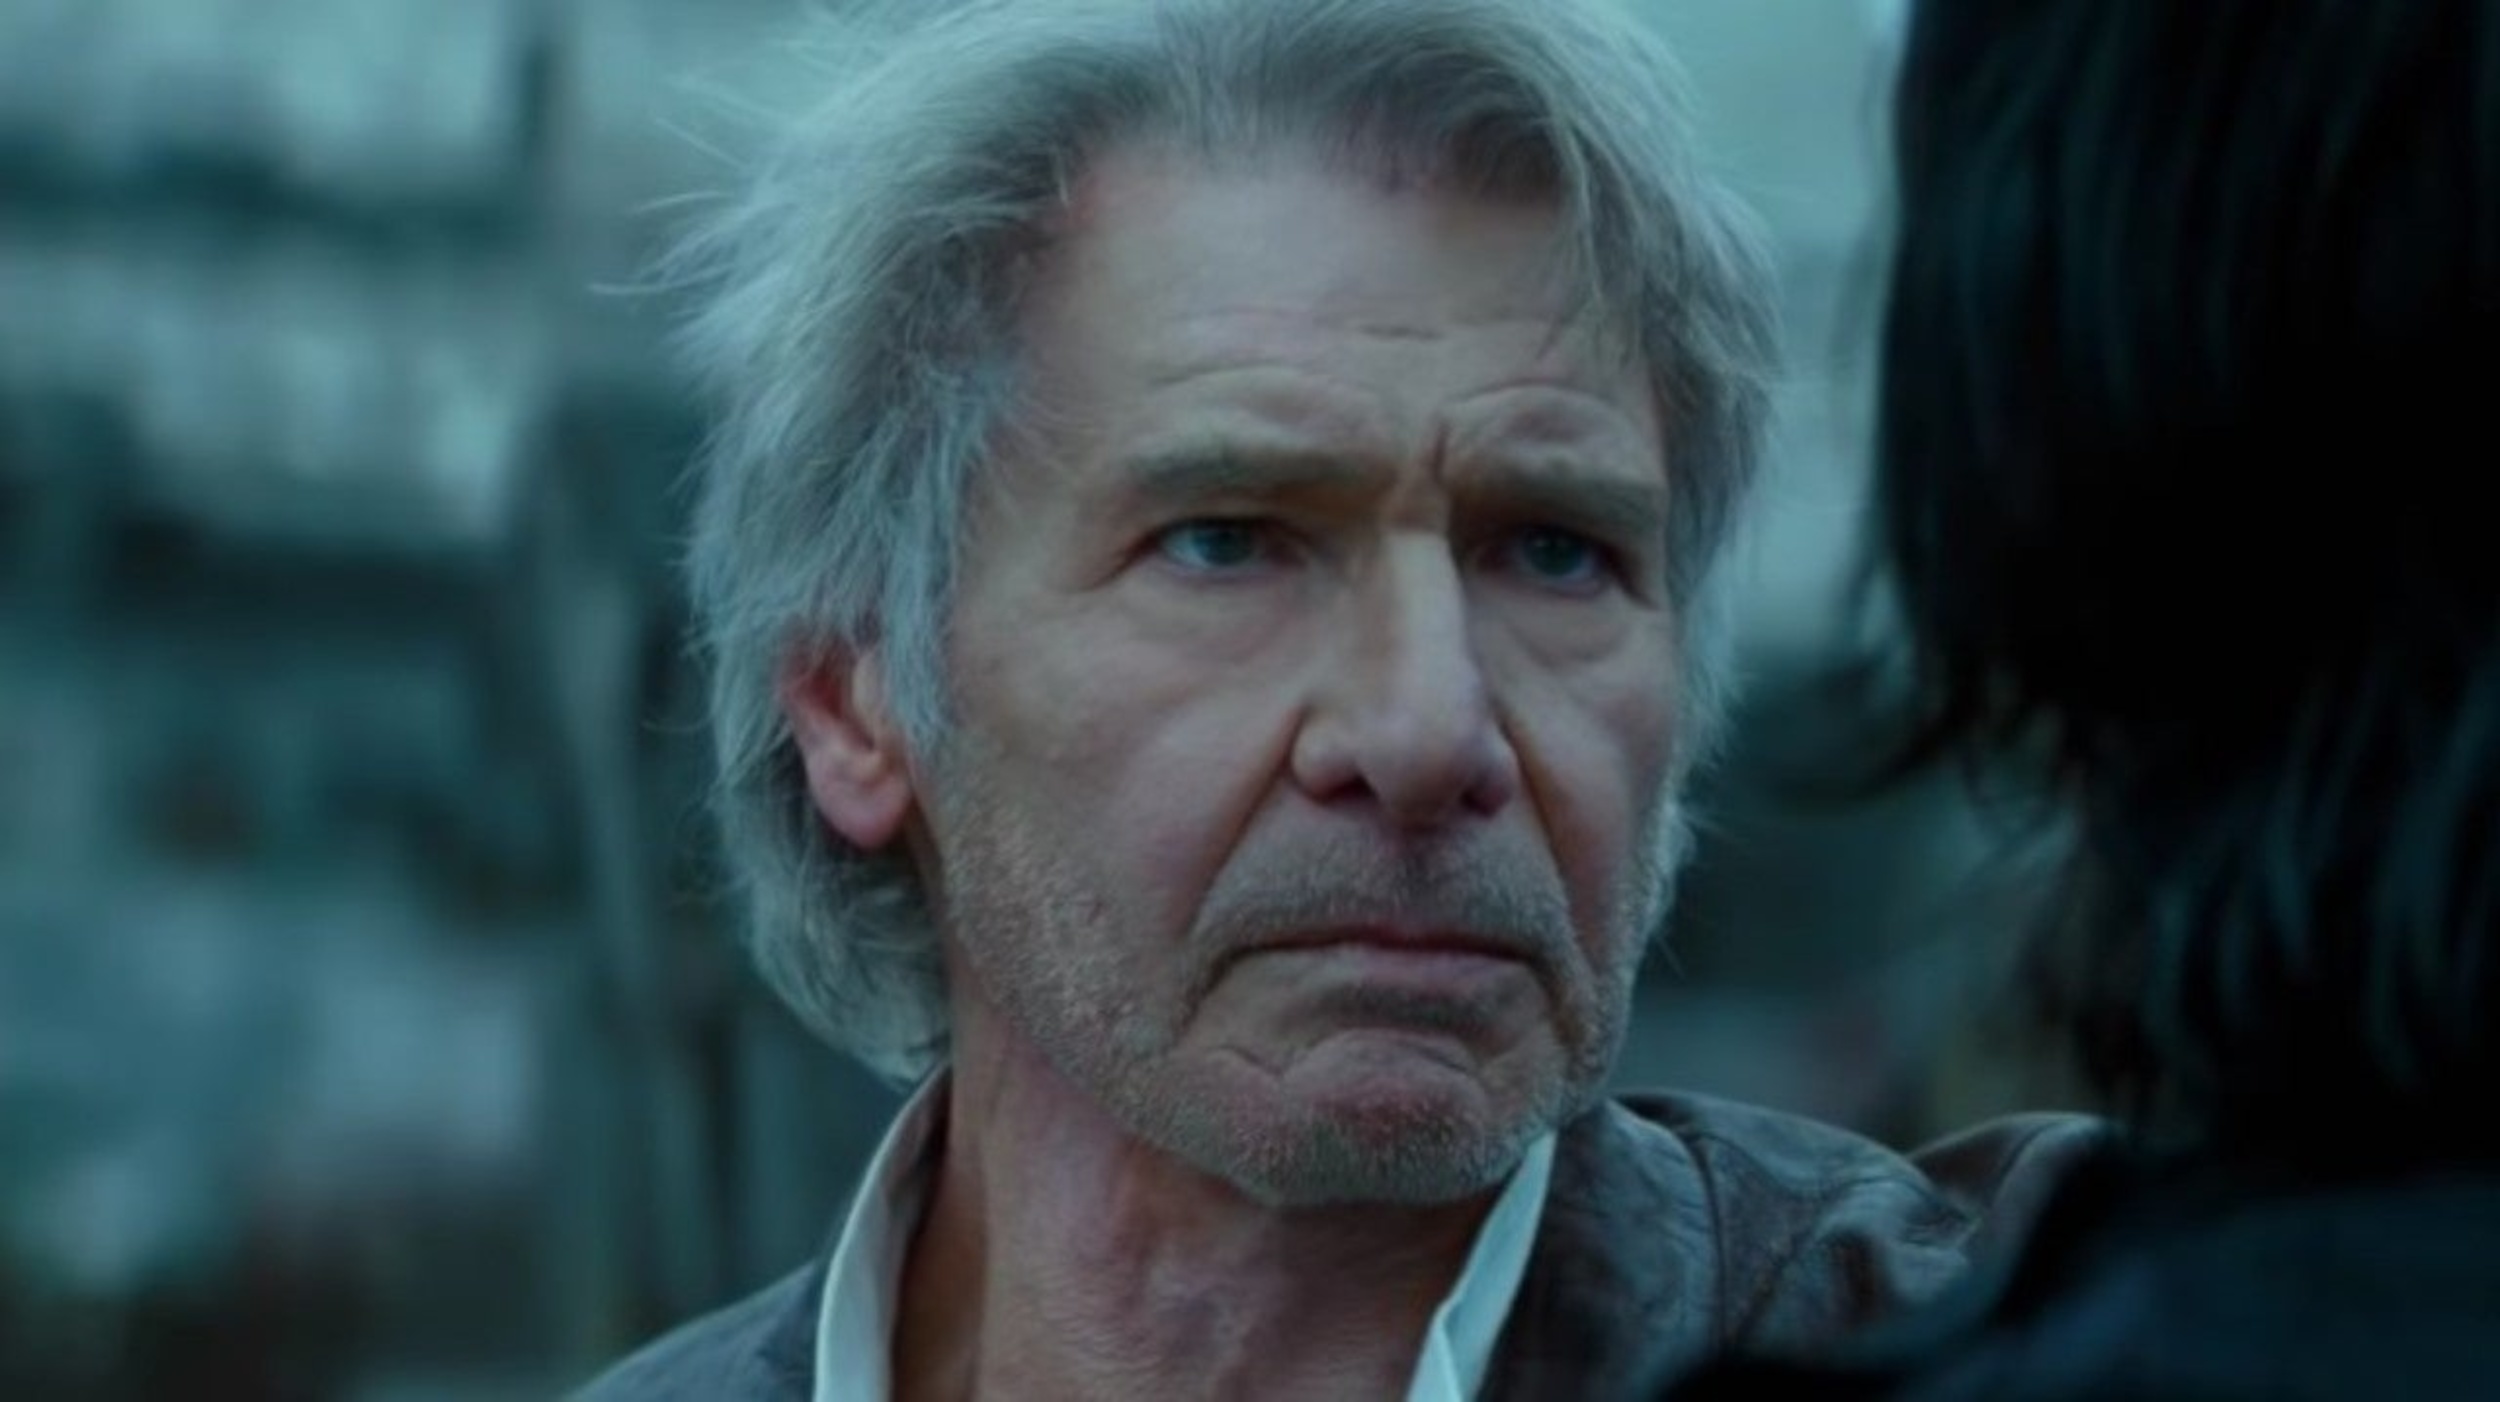 <p>The dead do more than speak in “The Rise of Skywalker.” They also appear as visions to their sons. While force ghosts are common in the “Star Wars” world, people lacking the force don’t tend to show up after they die. Don’t tell that to Han Solo, though. He returned in what seemed to be a hallucination to his son Ben, aka Kylo Ren. It’s an important moment in Ben’s arc, which ends with him helping to save the day, much like his grandfather before him.</p><p><a href='https://www.msn.com/en-us/community/channel/vid-cj9pqbr0vn9in2b6ddcd8sfgpfq6x6utp44fssrv6mc2gtybw0us'>Did you enjoy this slideshow? Follow us on MSN to see more of our exclusive entertainment content.</a></p>